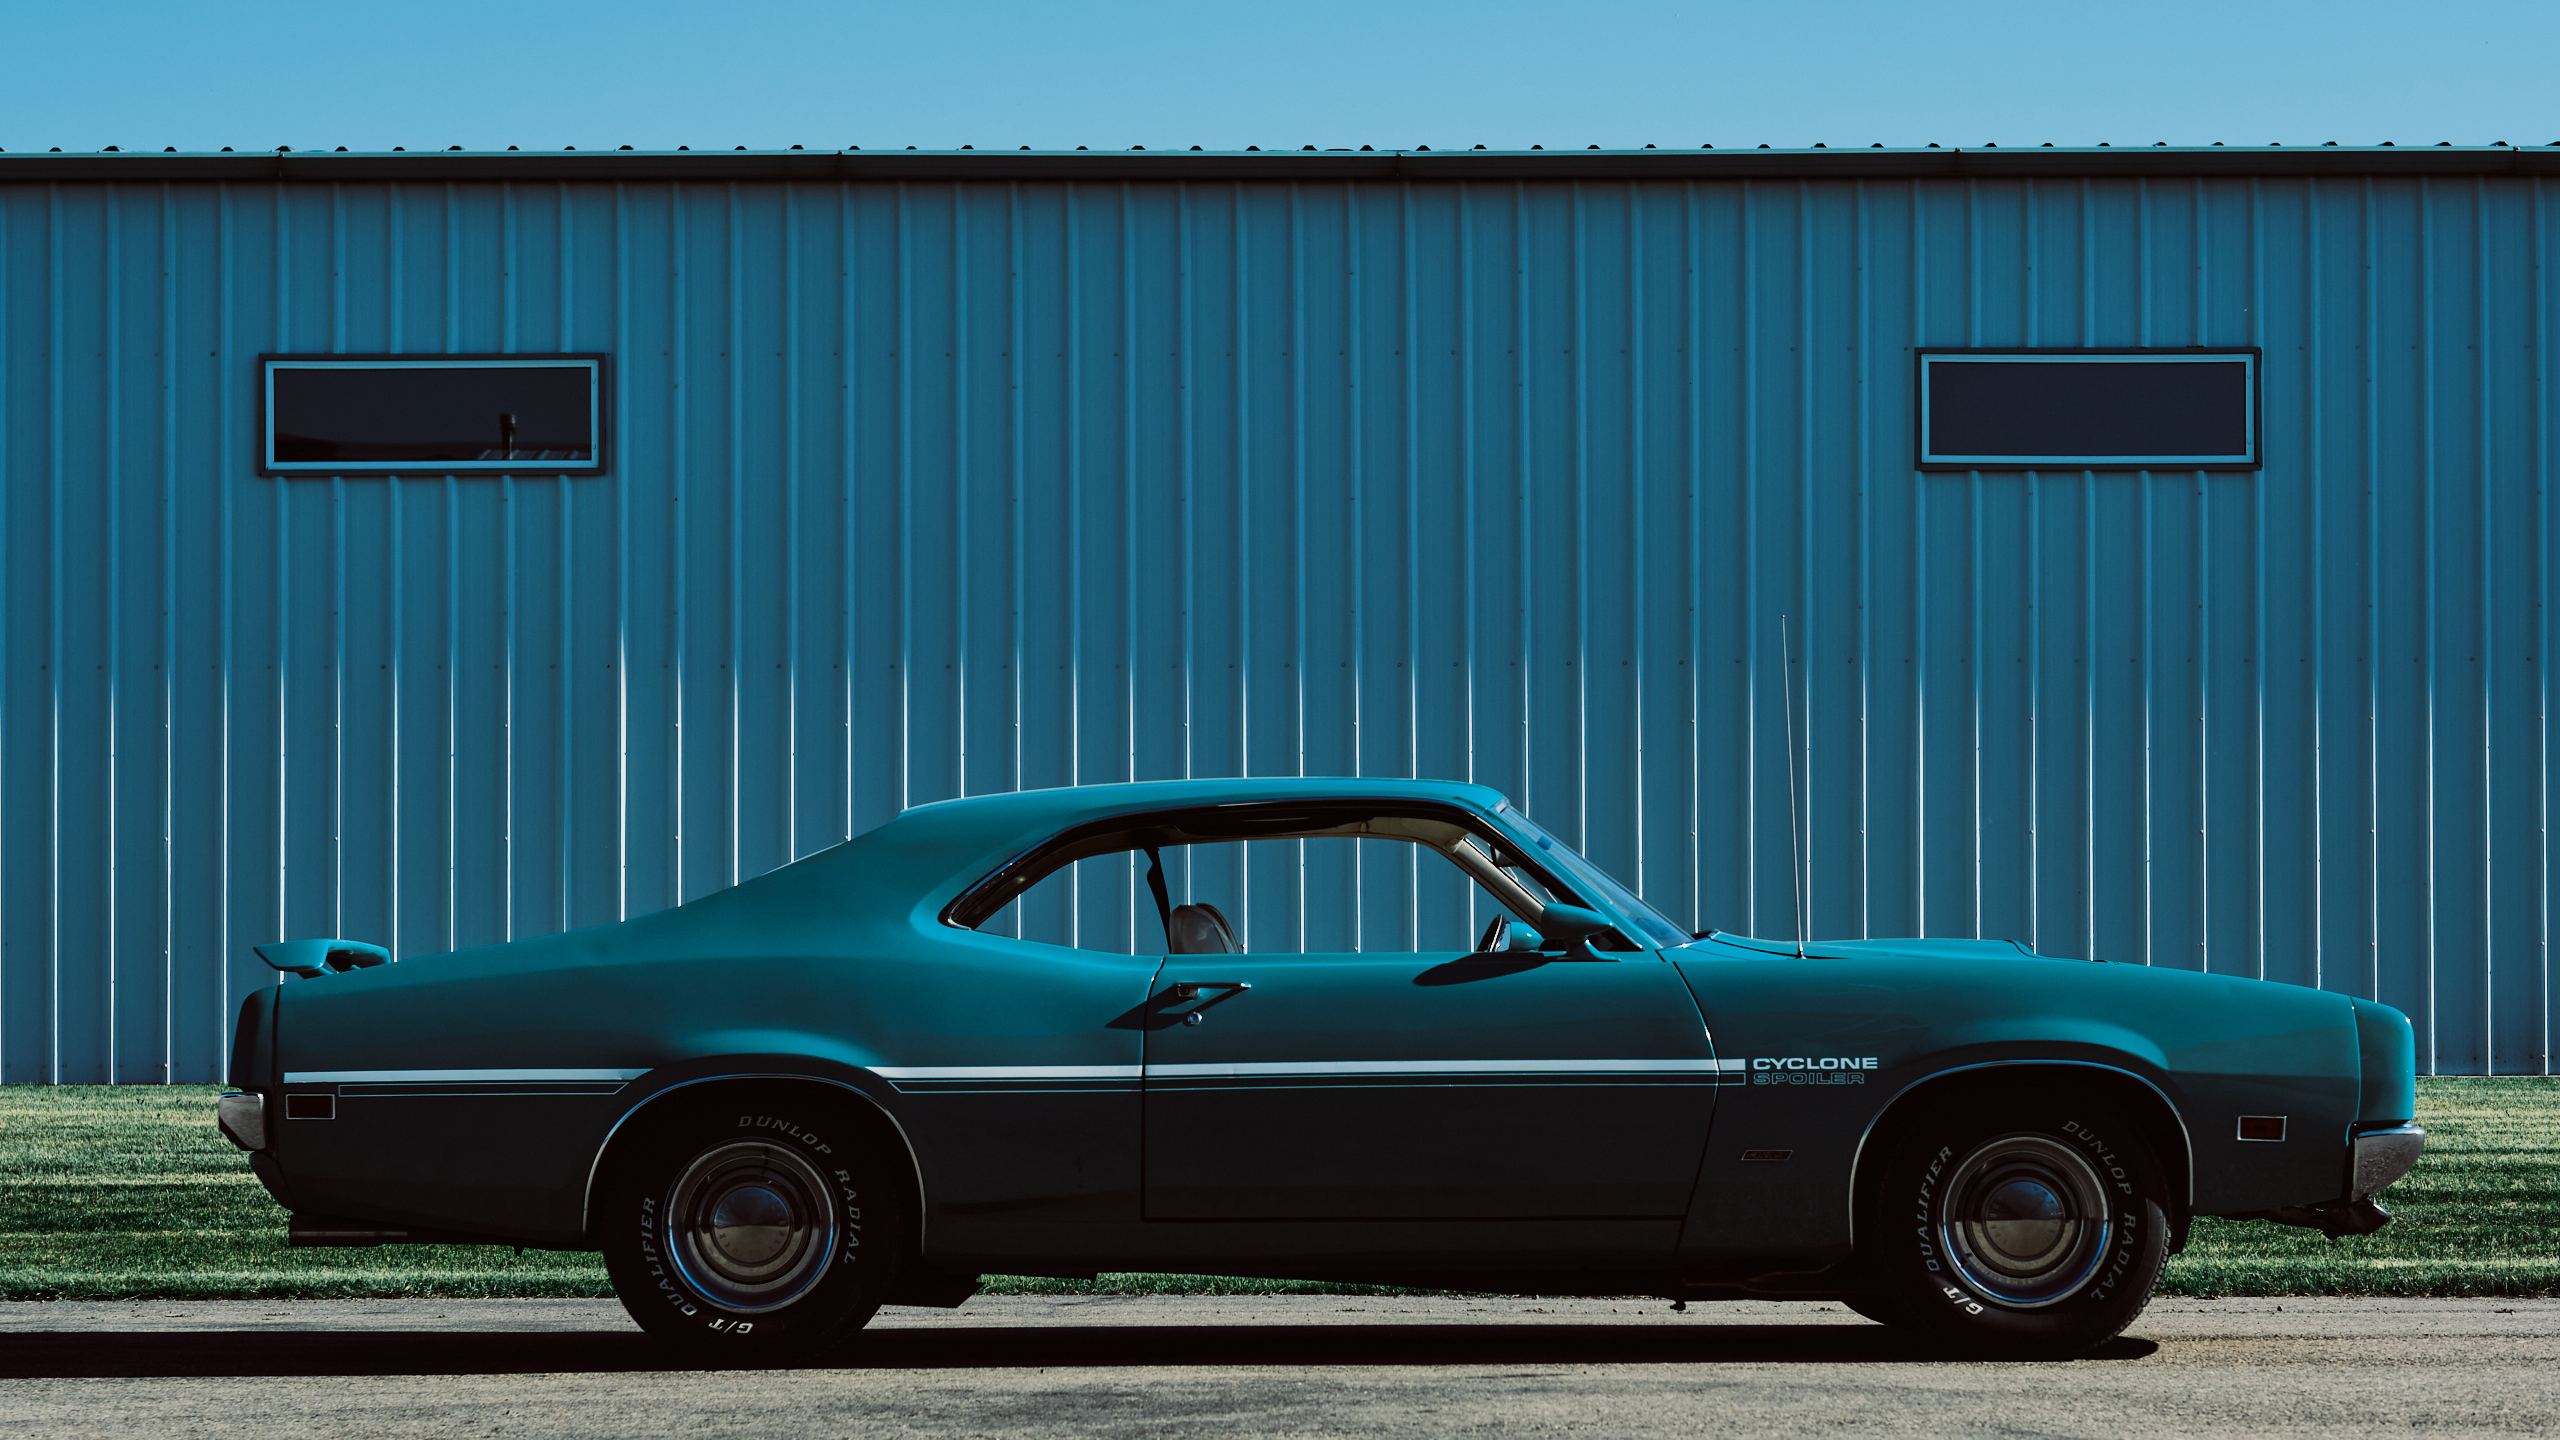 General 2560x1440 car photography vehicle muscle cars classic car Ford Ford Torino side view American cars